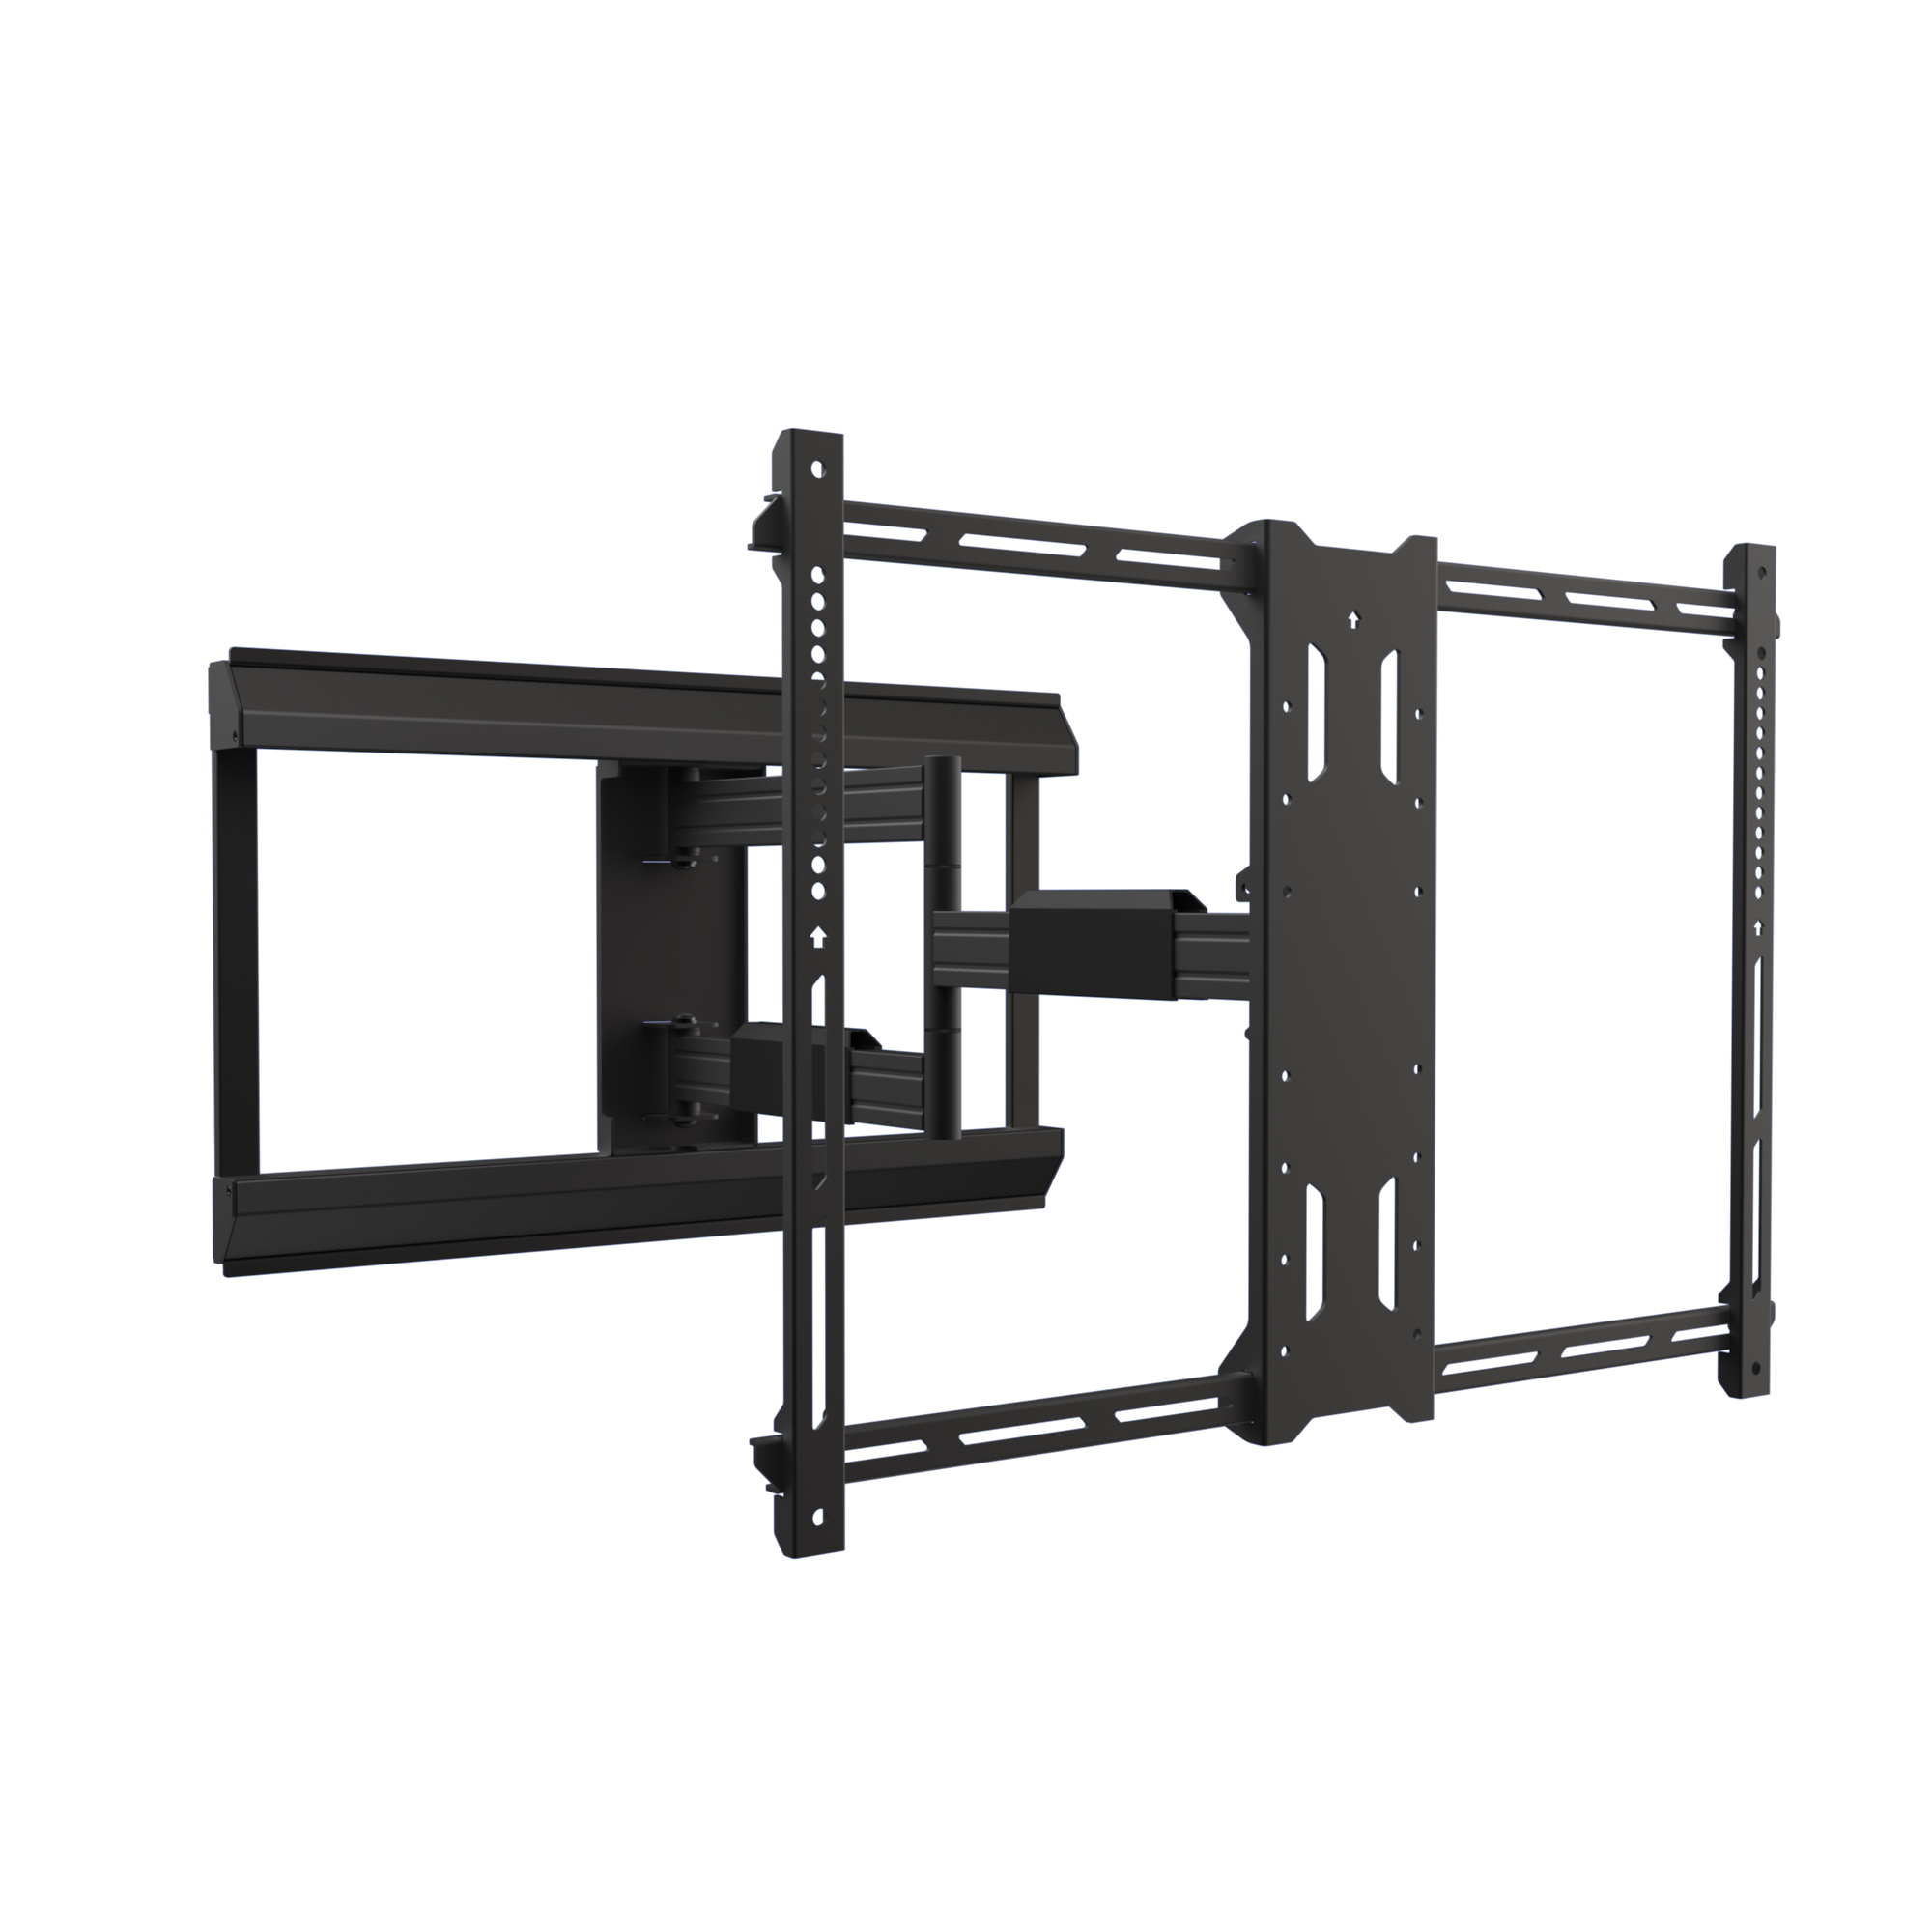 DirectConnect Landmark Series, Premium XL Articulating Mount, 150 lb Max, Recommended for 42" - 82", up to 700 X 500 Vesa, 29" of Max Extension, 11" Horizontal Offset ** EXTRA FREIGHT ITEM ** **Use 3/8" Bit for Masonary**